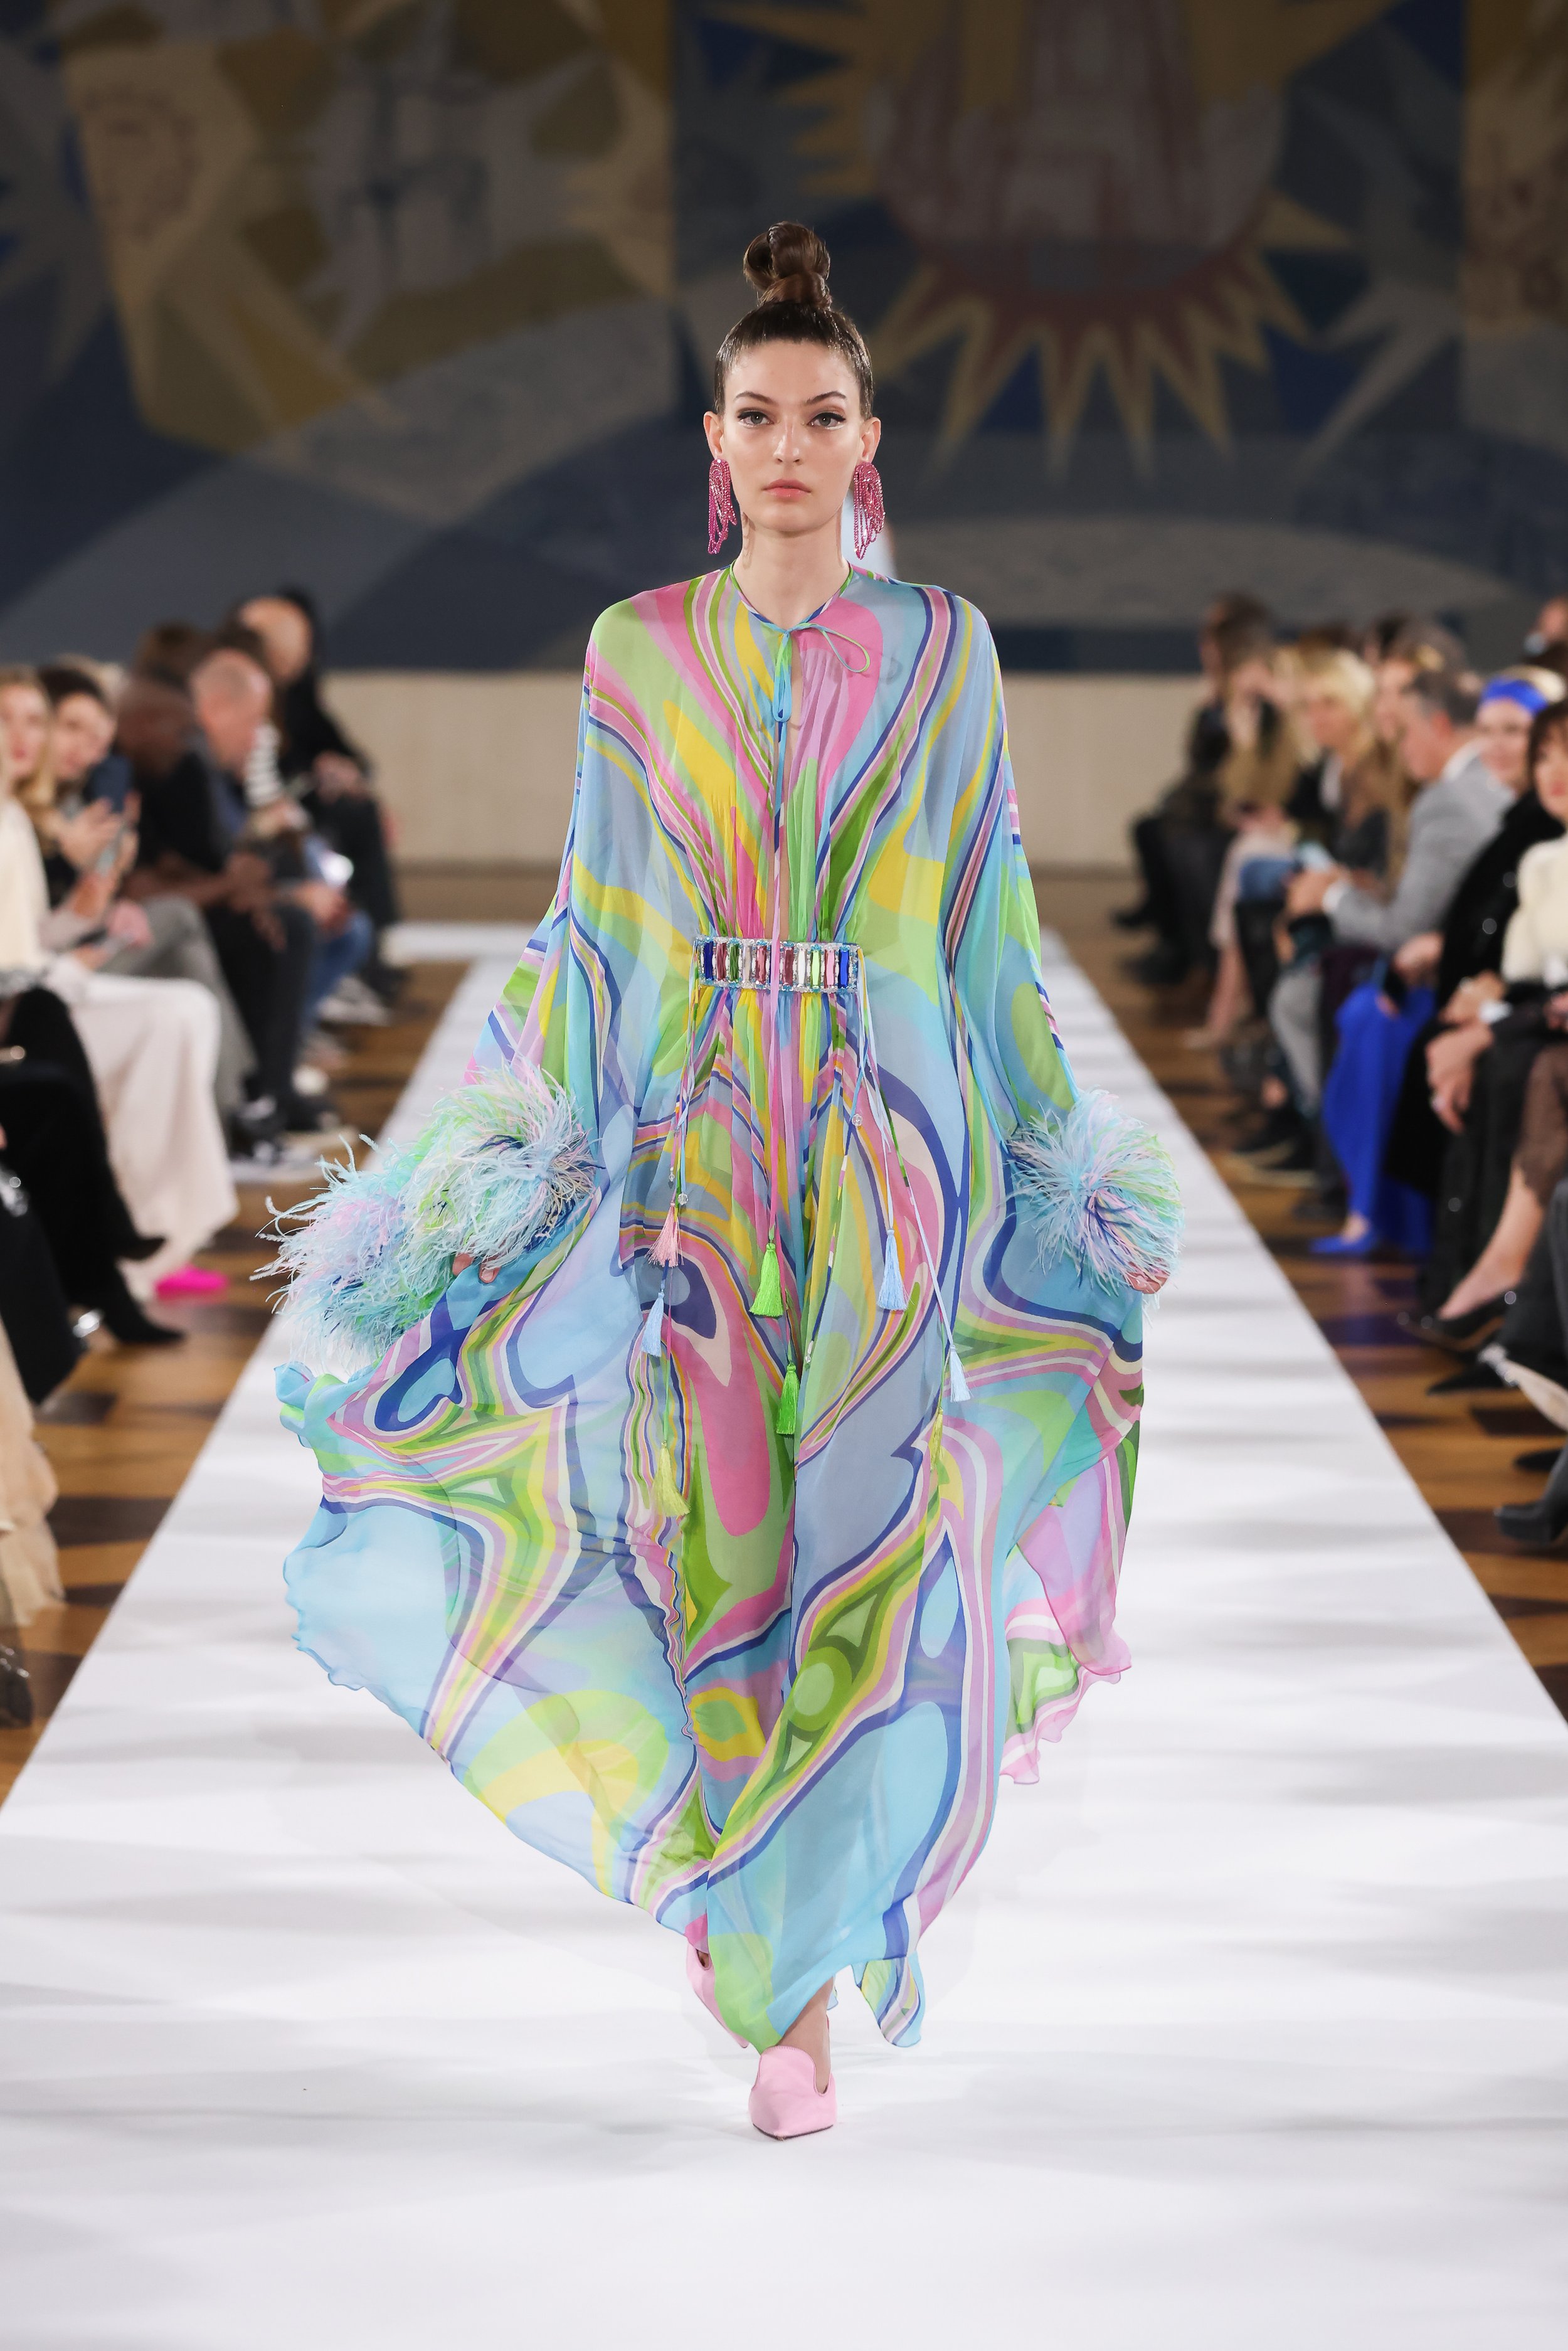 Spring 2022 Haute Couture: Yanina Couture's Colourfull Vision ...